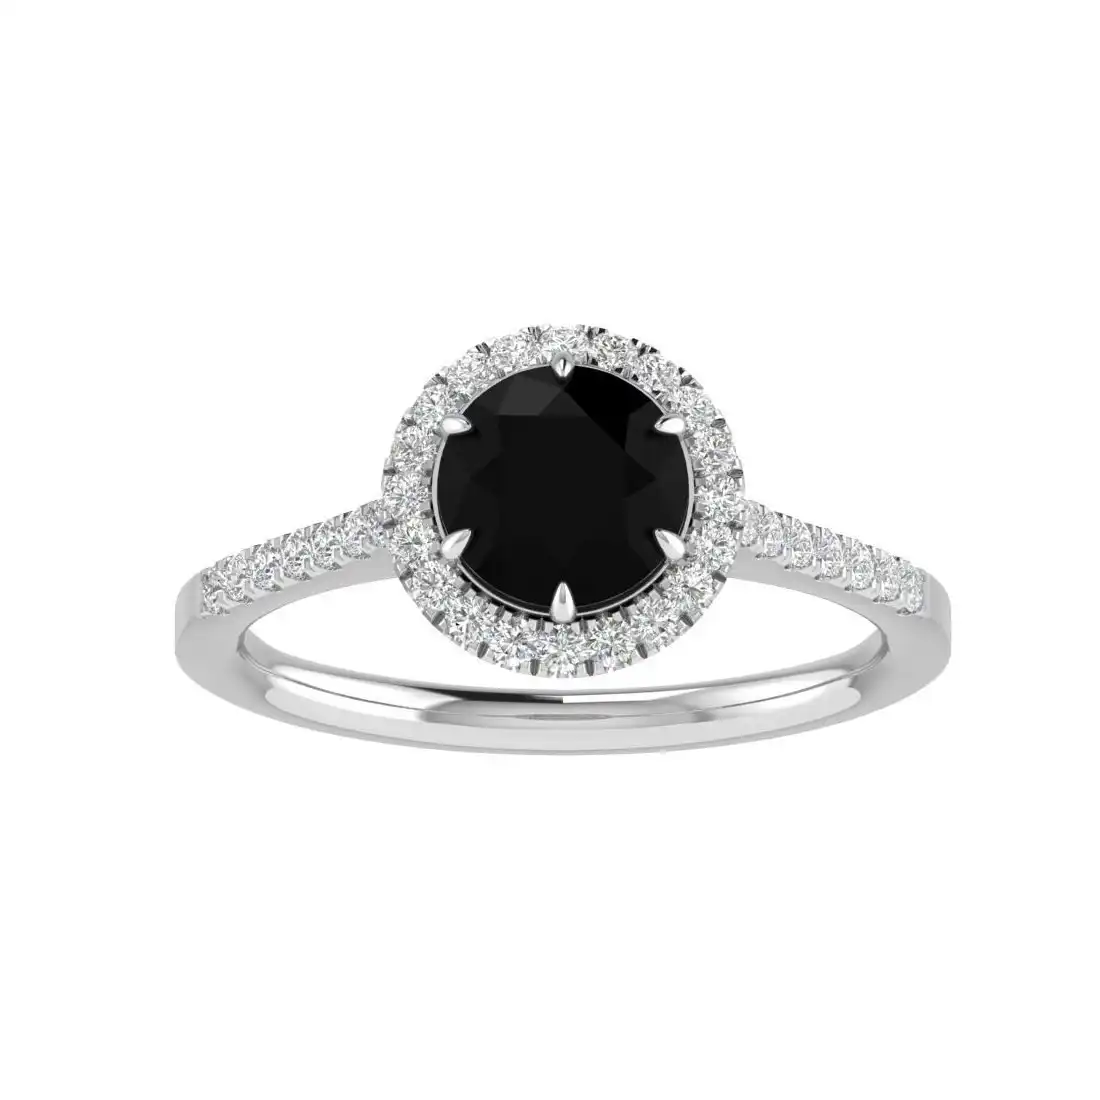 Facets of Love 18ct White Gold Black Diamond Ring with 1.50ct of Diamonds